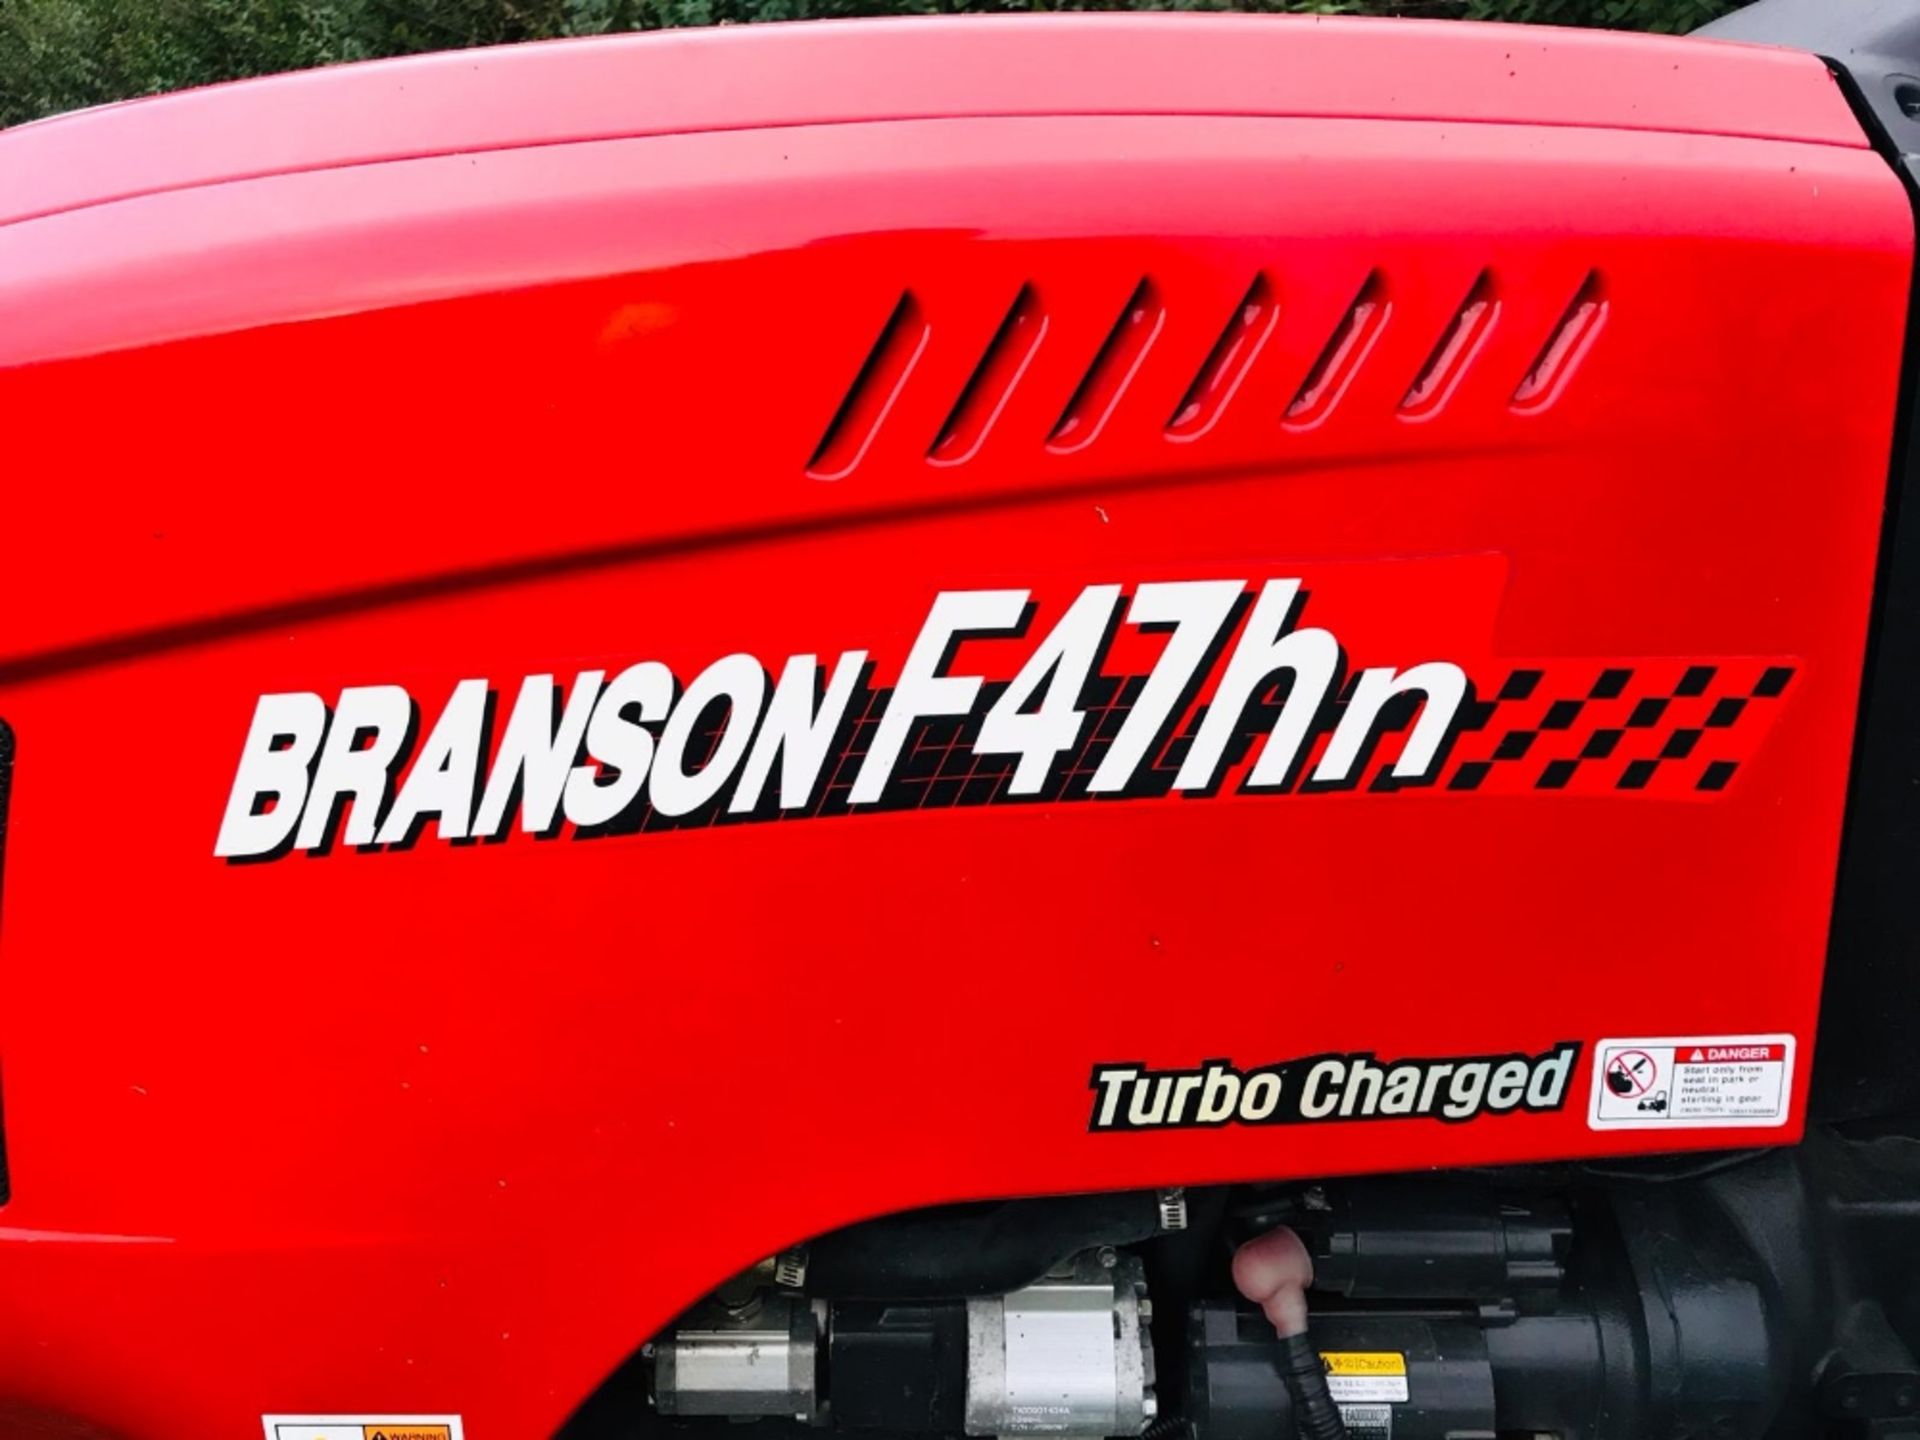 BRANSON F47HN COMPACT TRACTOR ON TURF TYRES, HYDROSTATIC DRIVE, 47HP, ROAD REGISTERED 67 REG WITH - Image 4 of 5